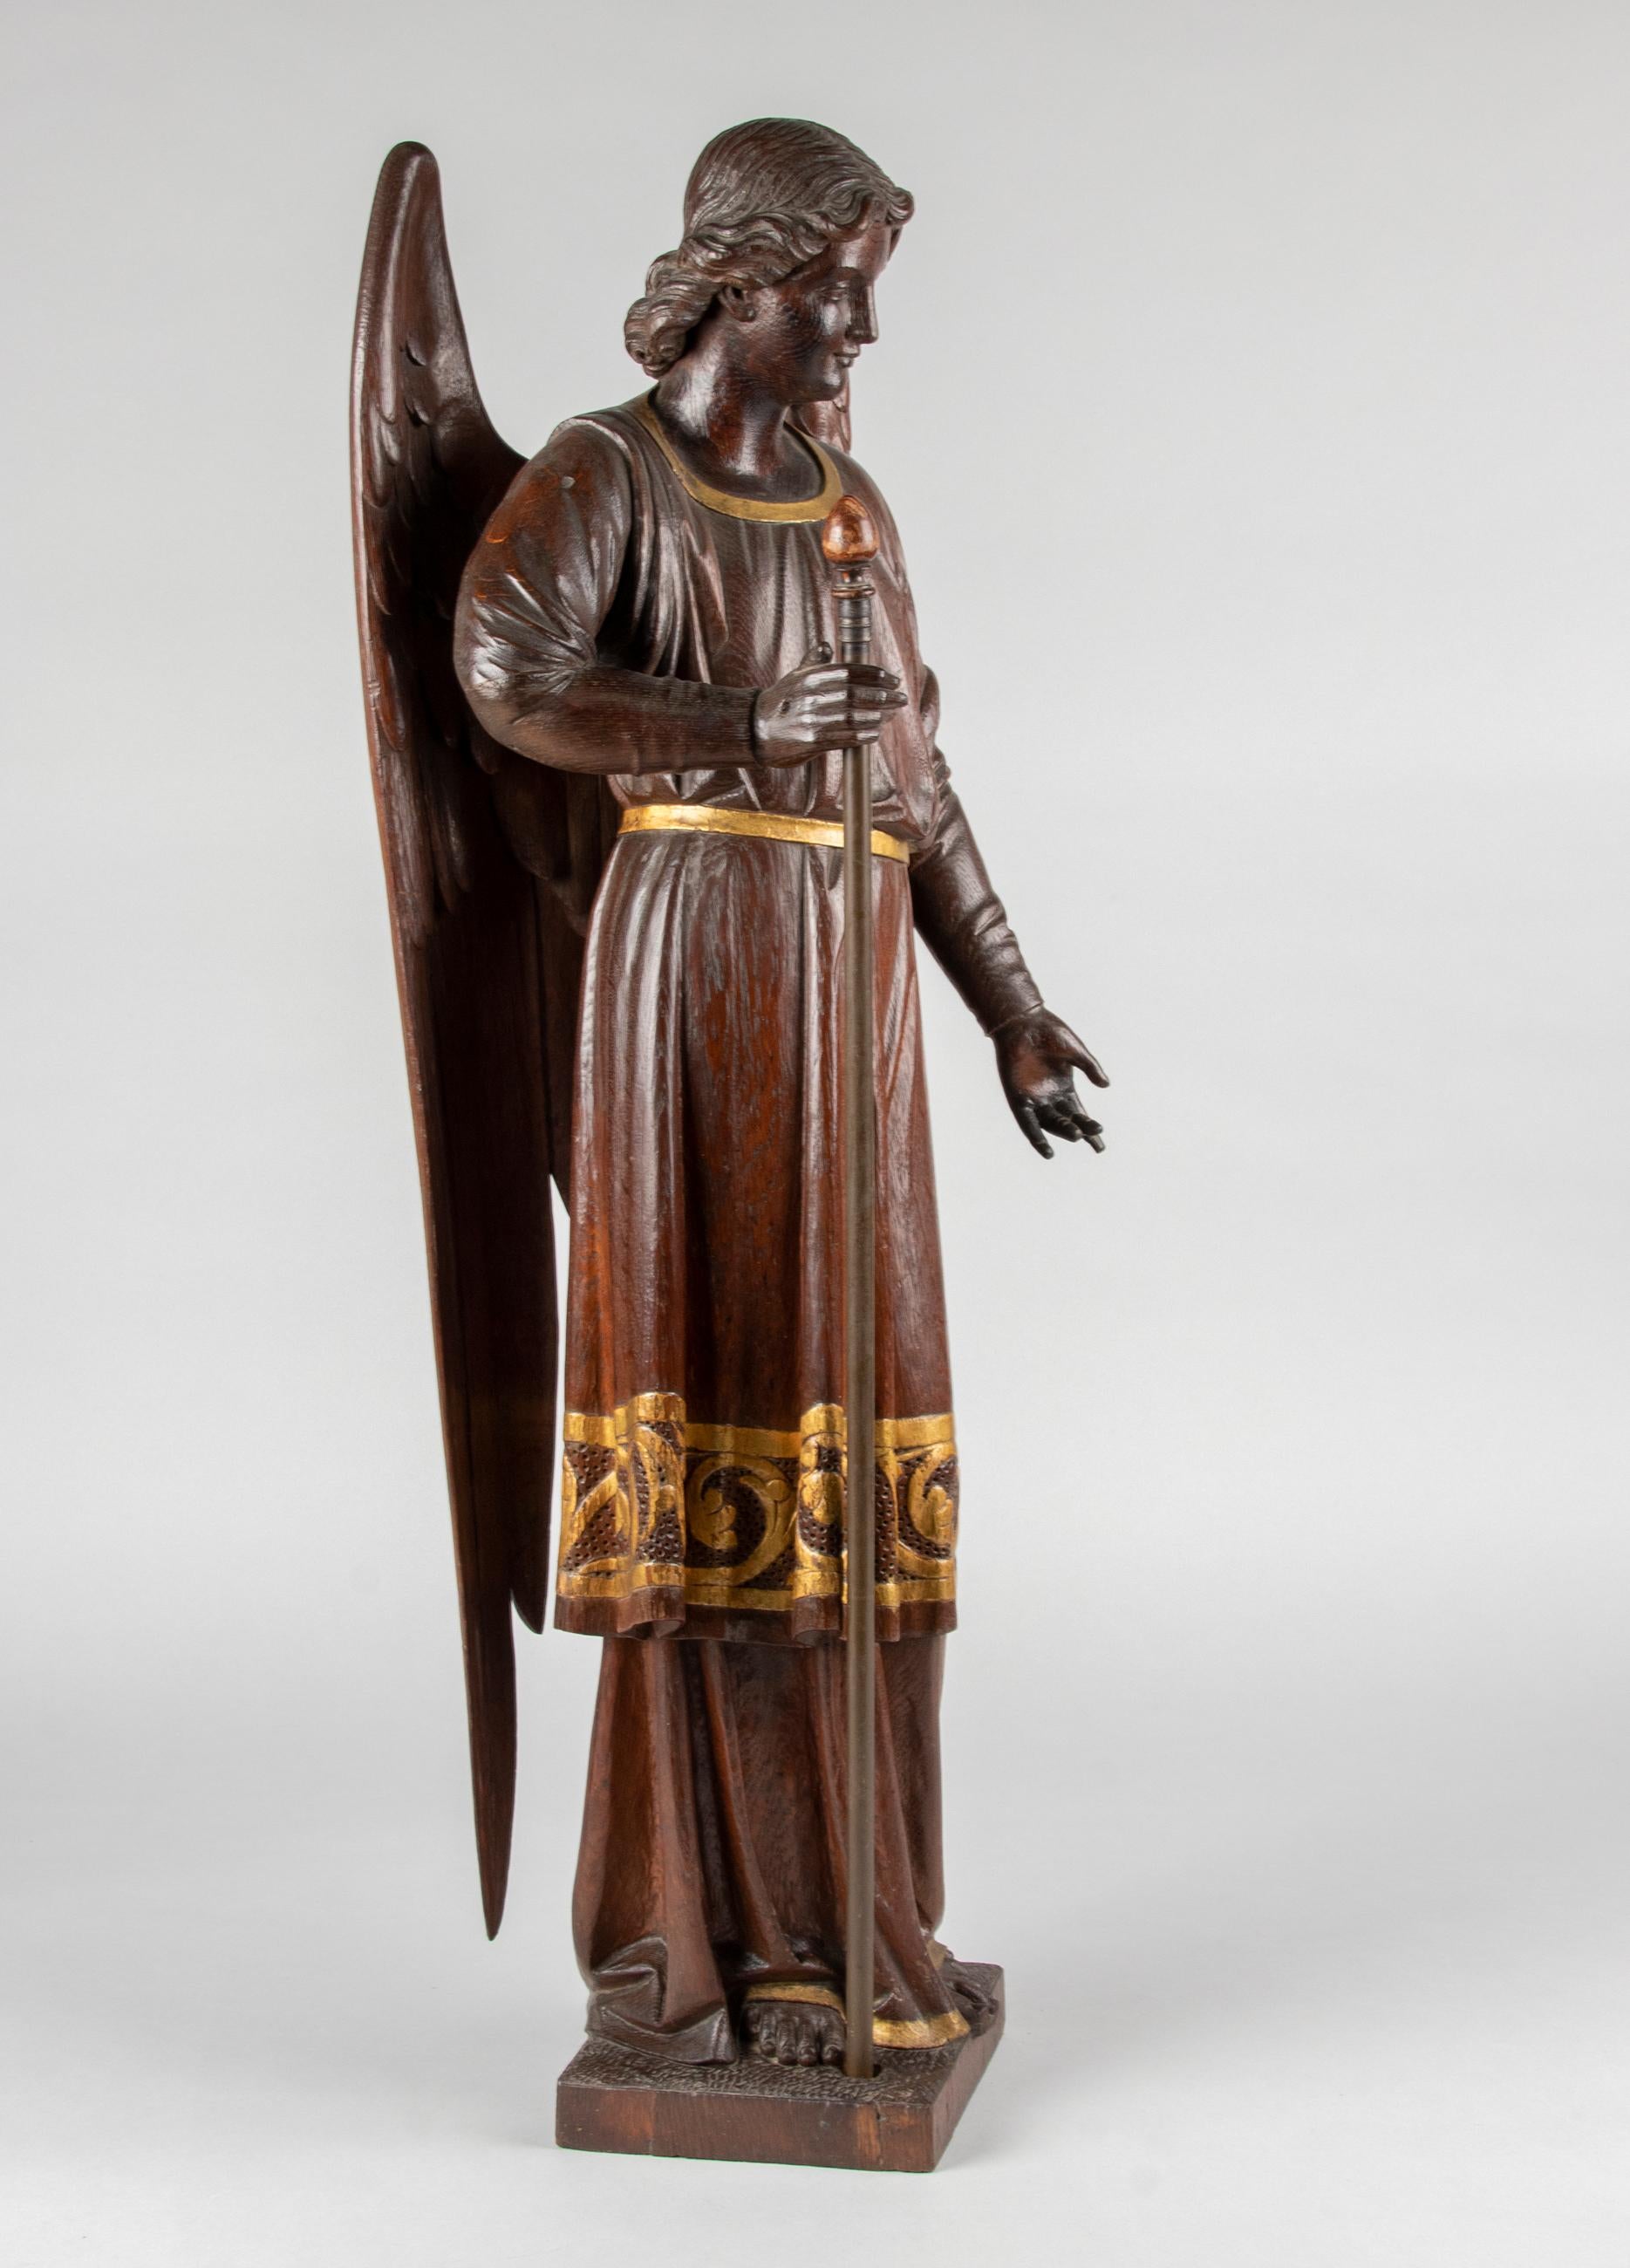 Beautiful antique wooden religious statue.
It is a representation of angel Gabriel.
The statue is beautifully designed, with refined wood carvings and a modest appearance. Gabriel's clothes have nice gilded decorations. Gabriel is one of the arch